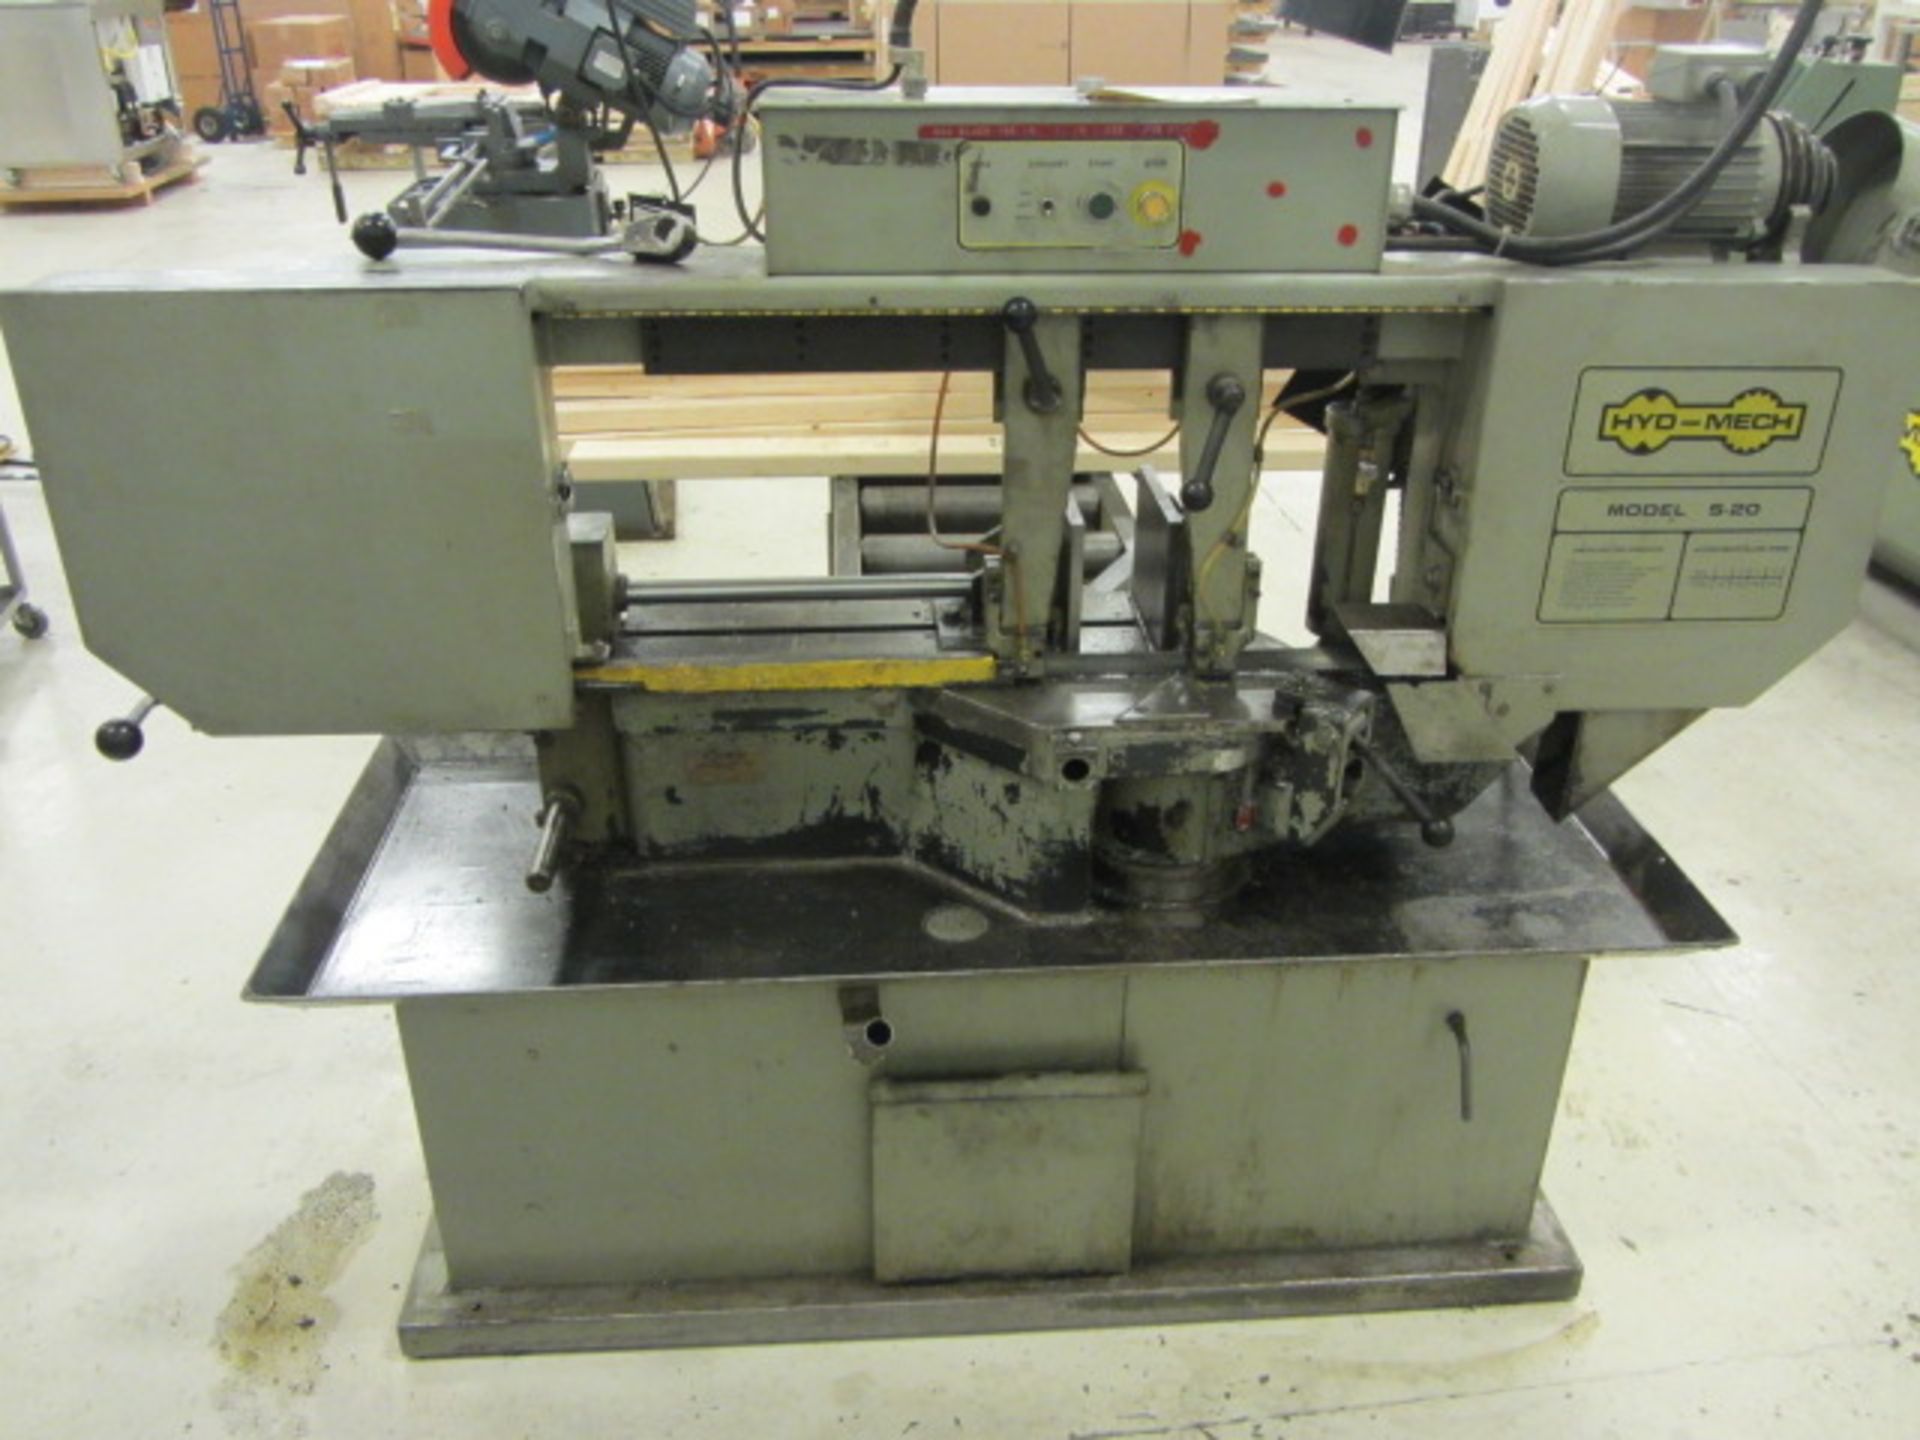 Hyd-Mech S-20 Mitre Cutting Horizontal Bandsaw with 13''H x 18''W Capacity, 13'' Rounds, Mitres to - Image 6 of 8